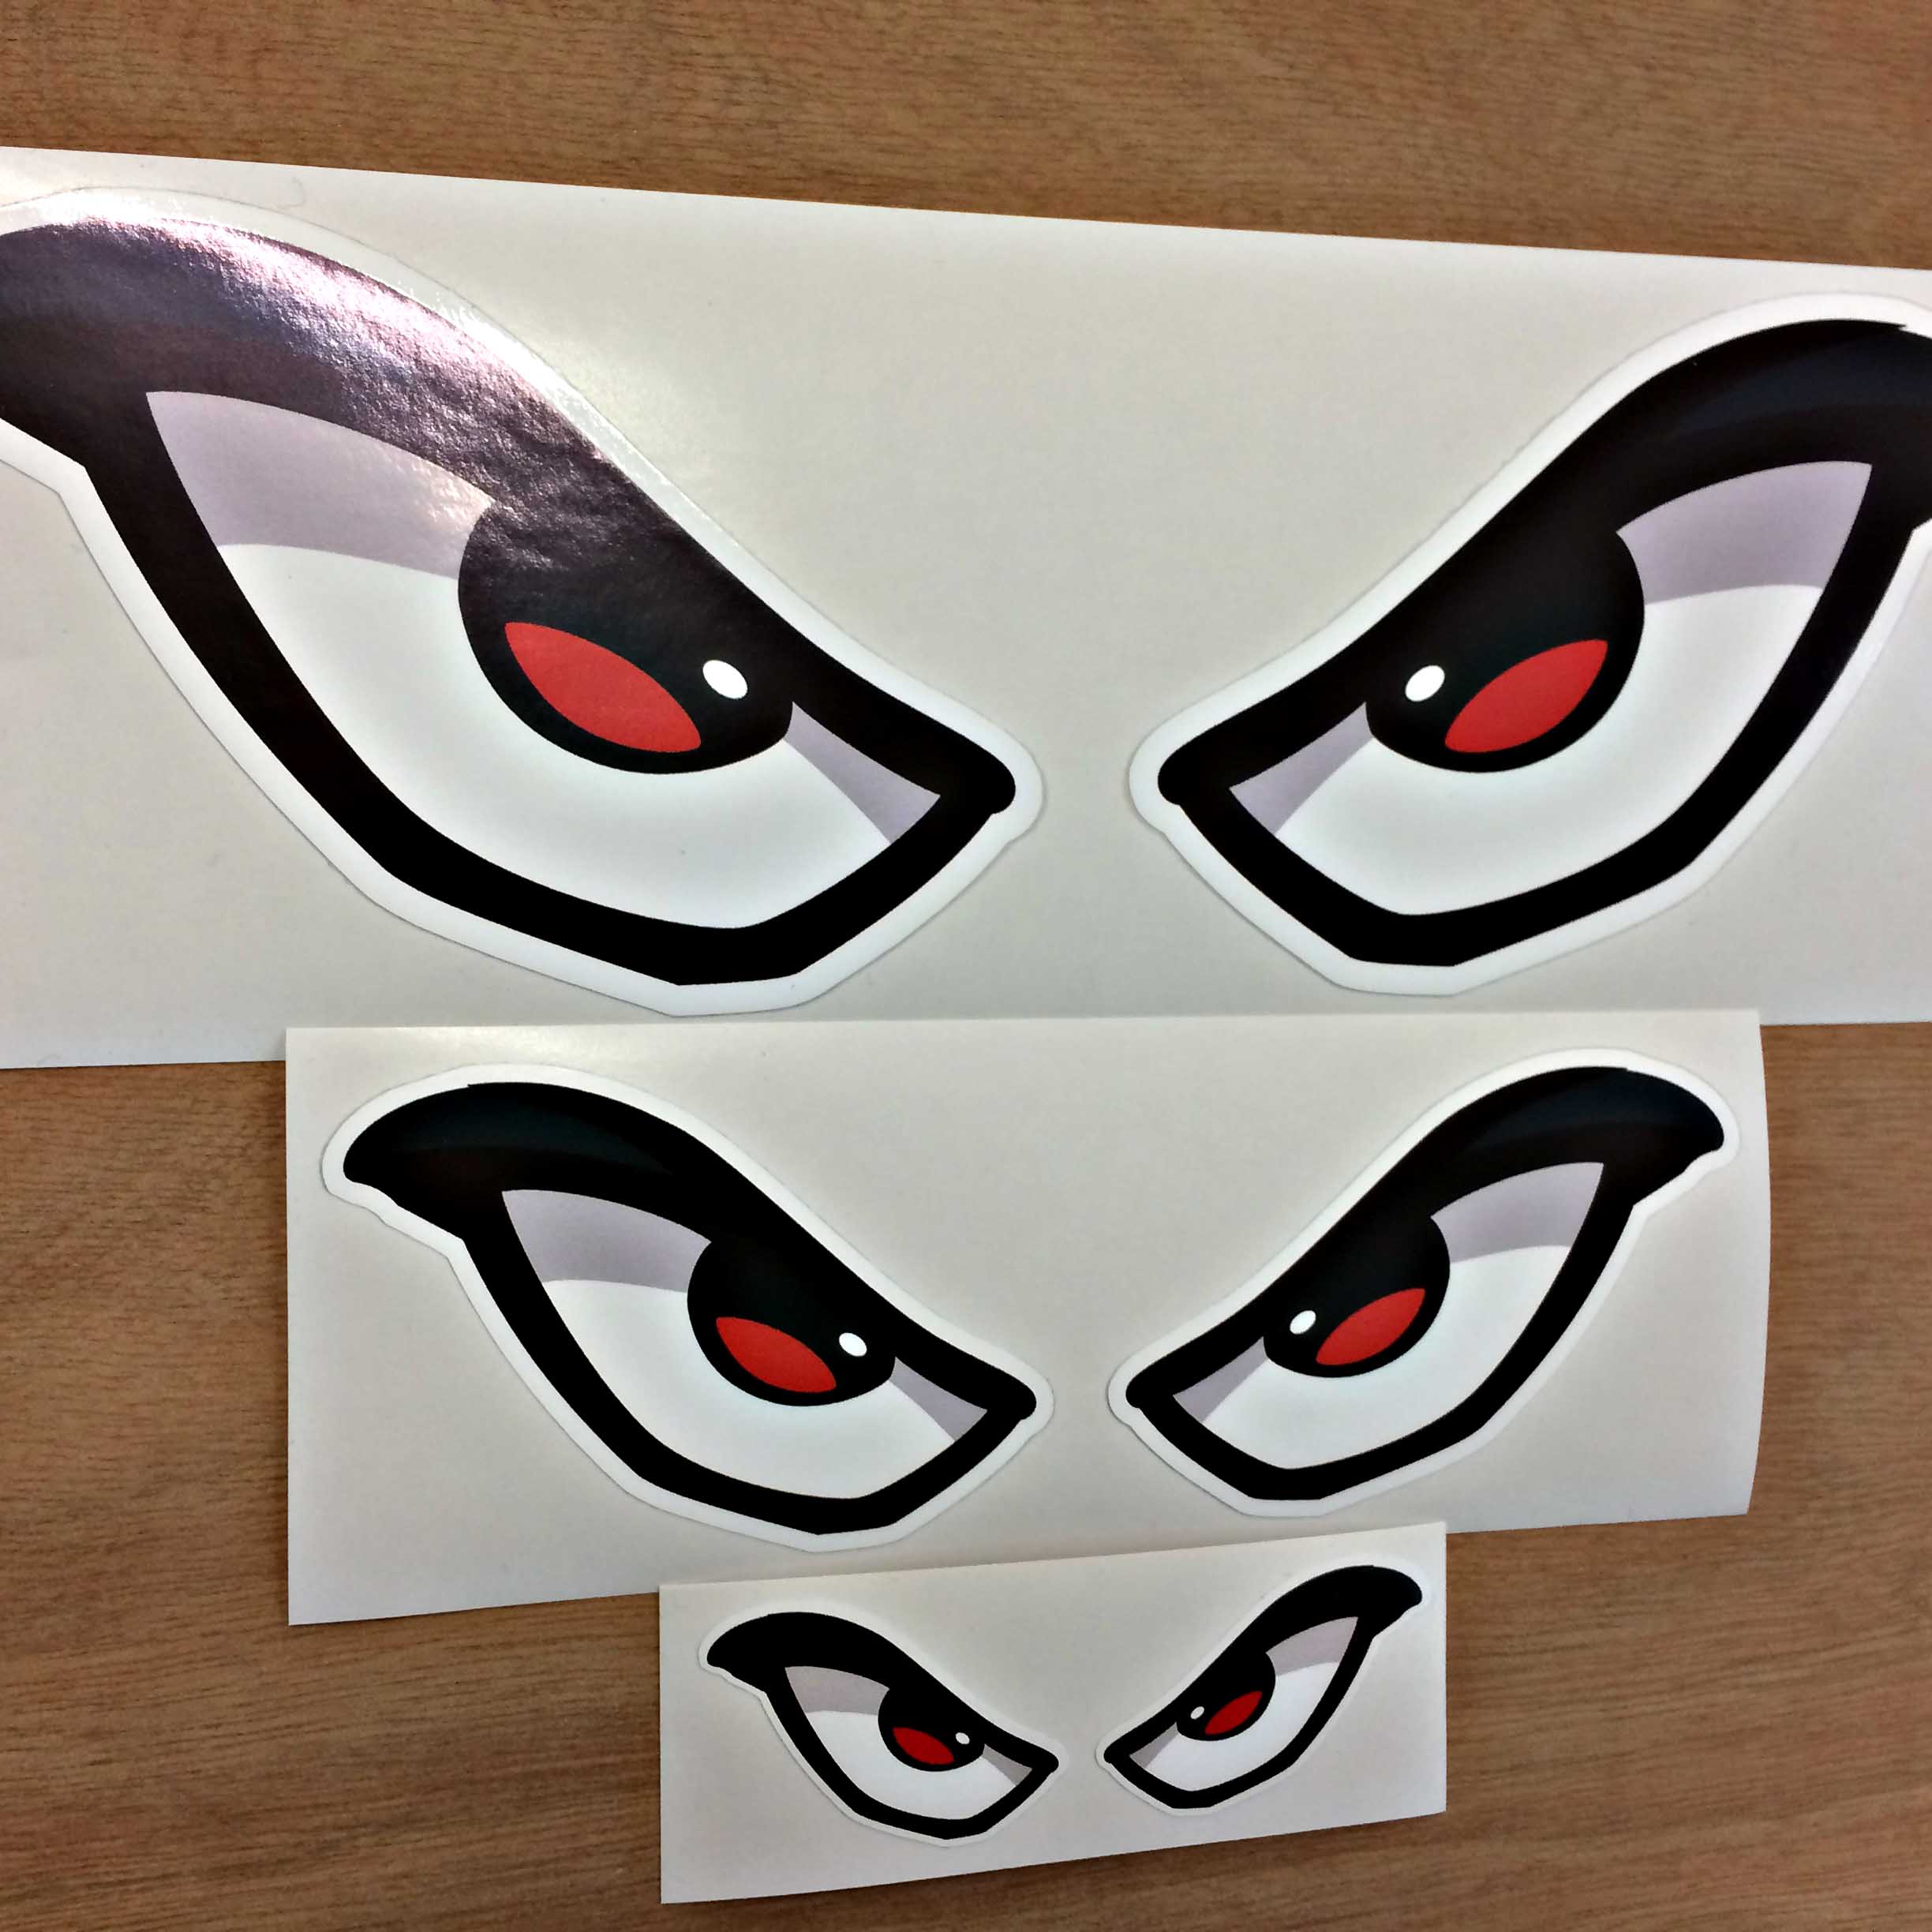 EVIL EYES STICKER. A pair of white evil eyes with red pupils outlined in thick black.